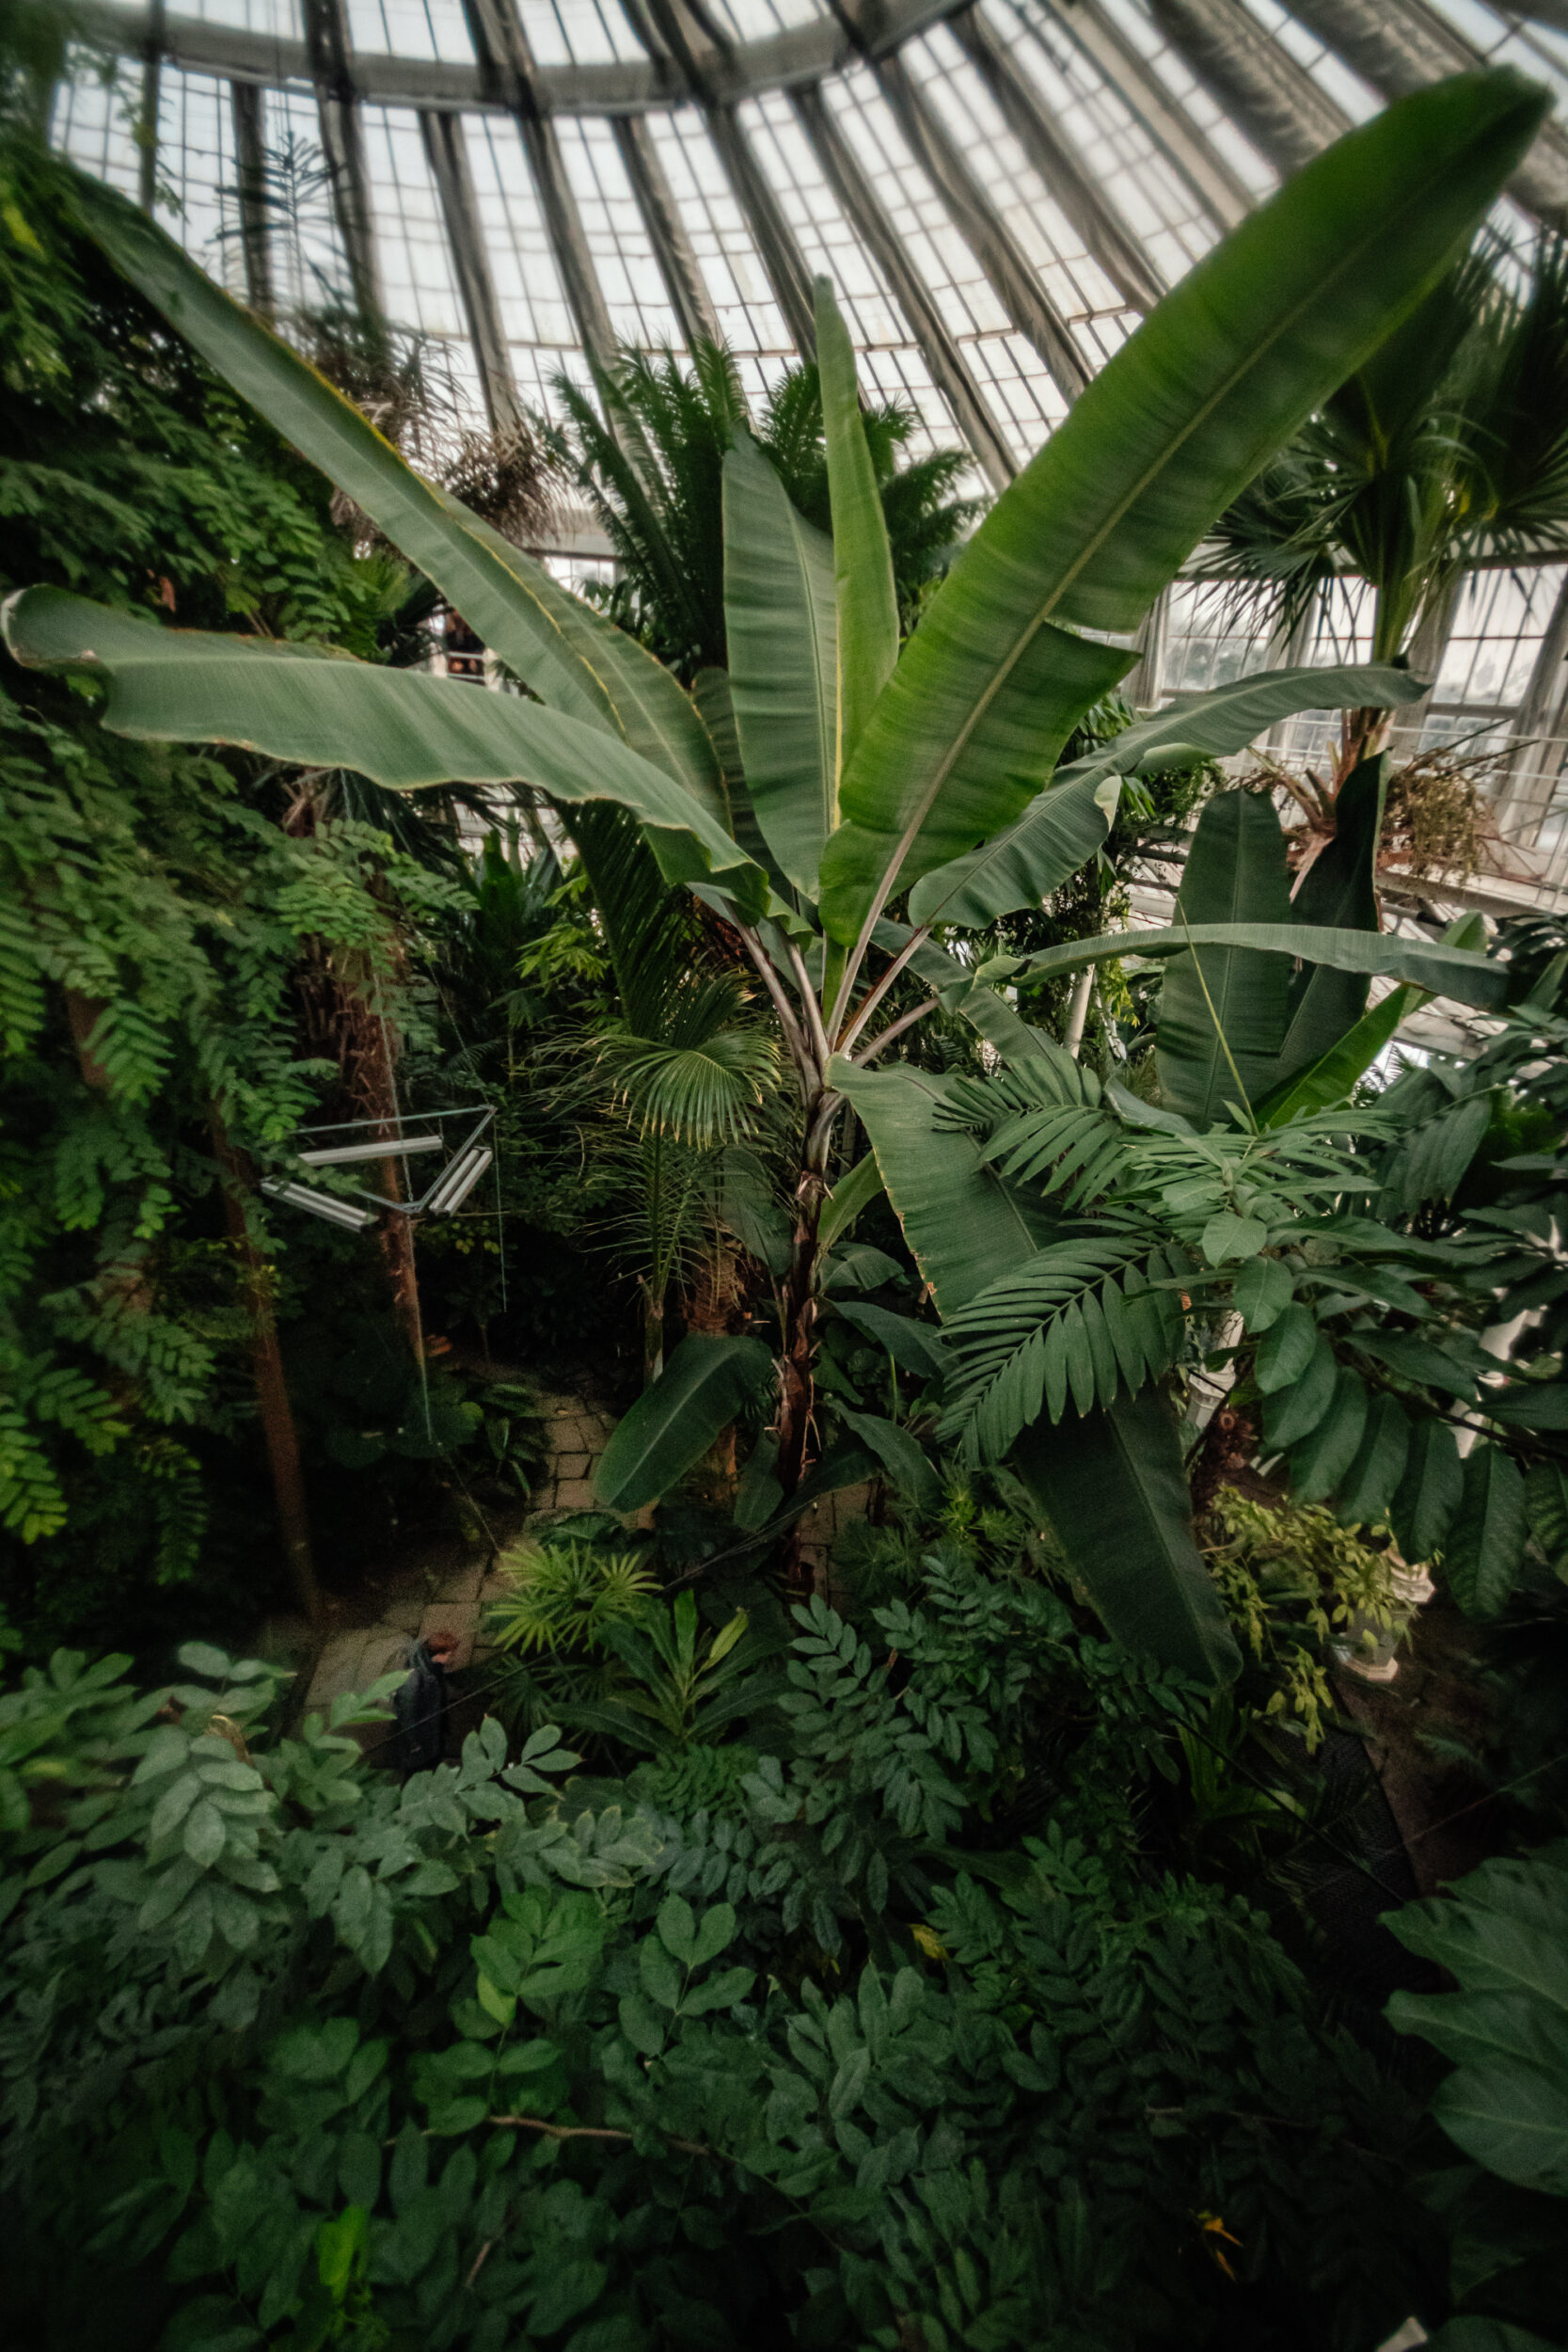 Looking down into the Palm House of the Copenhagen Botanical Gardens from an upper walkway